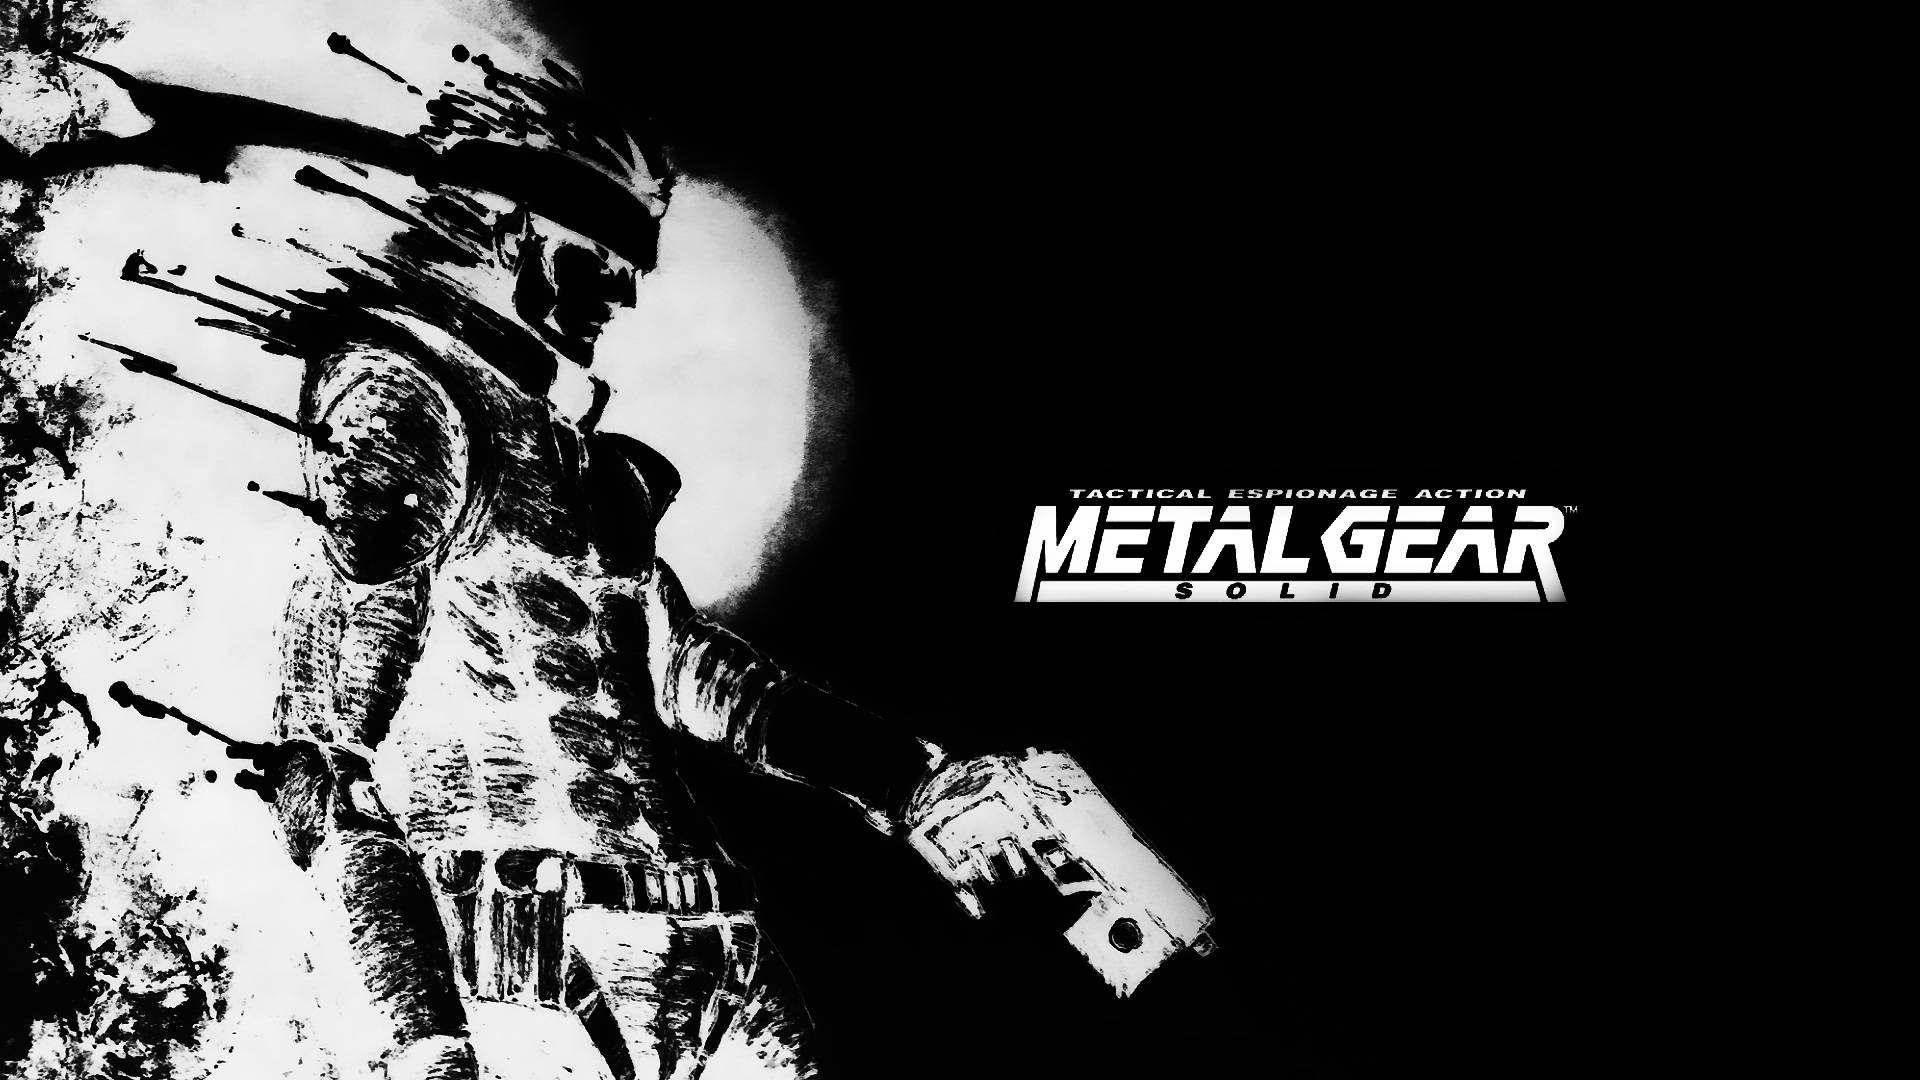 Metal Gear Solid takes stealth action to a whole new level Wallpaper